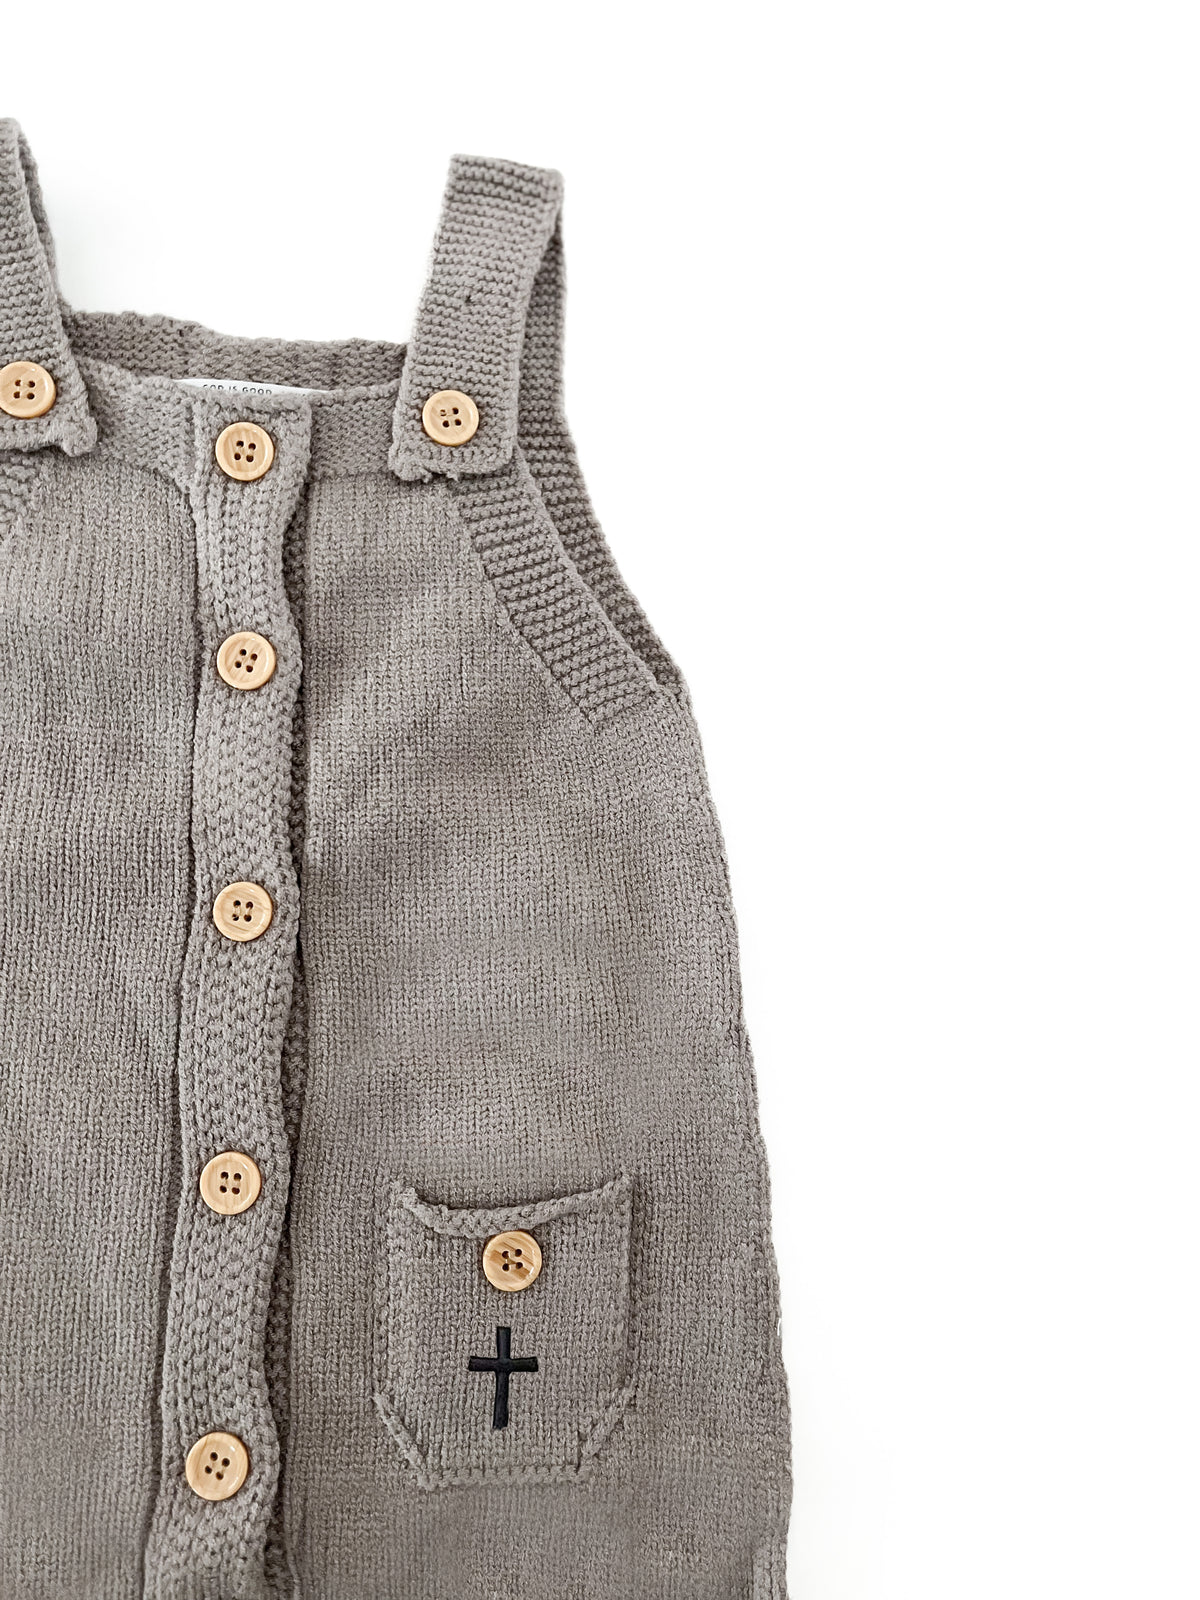 LAST ONE*** Black Cross Knitted Overalls